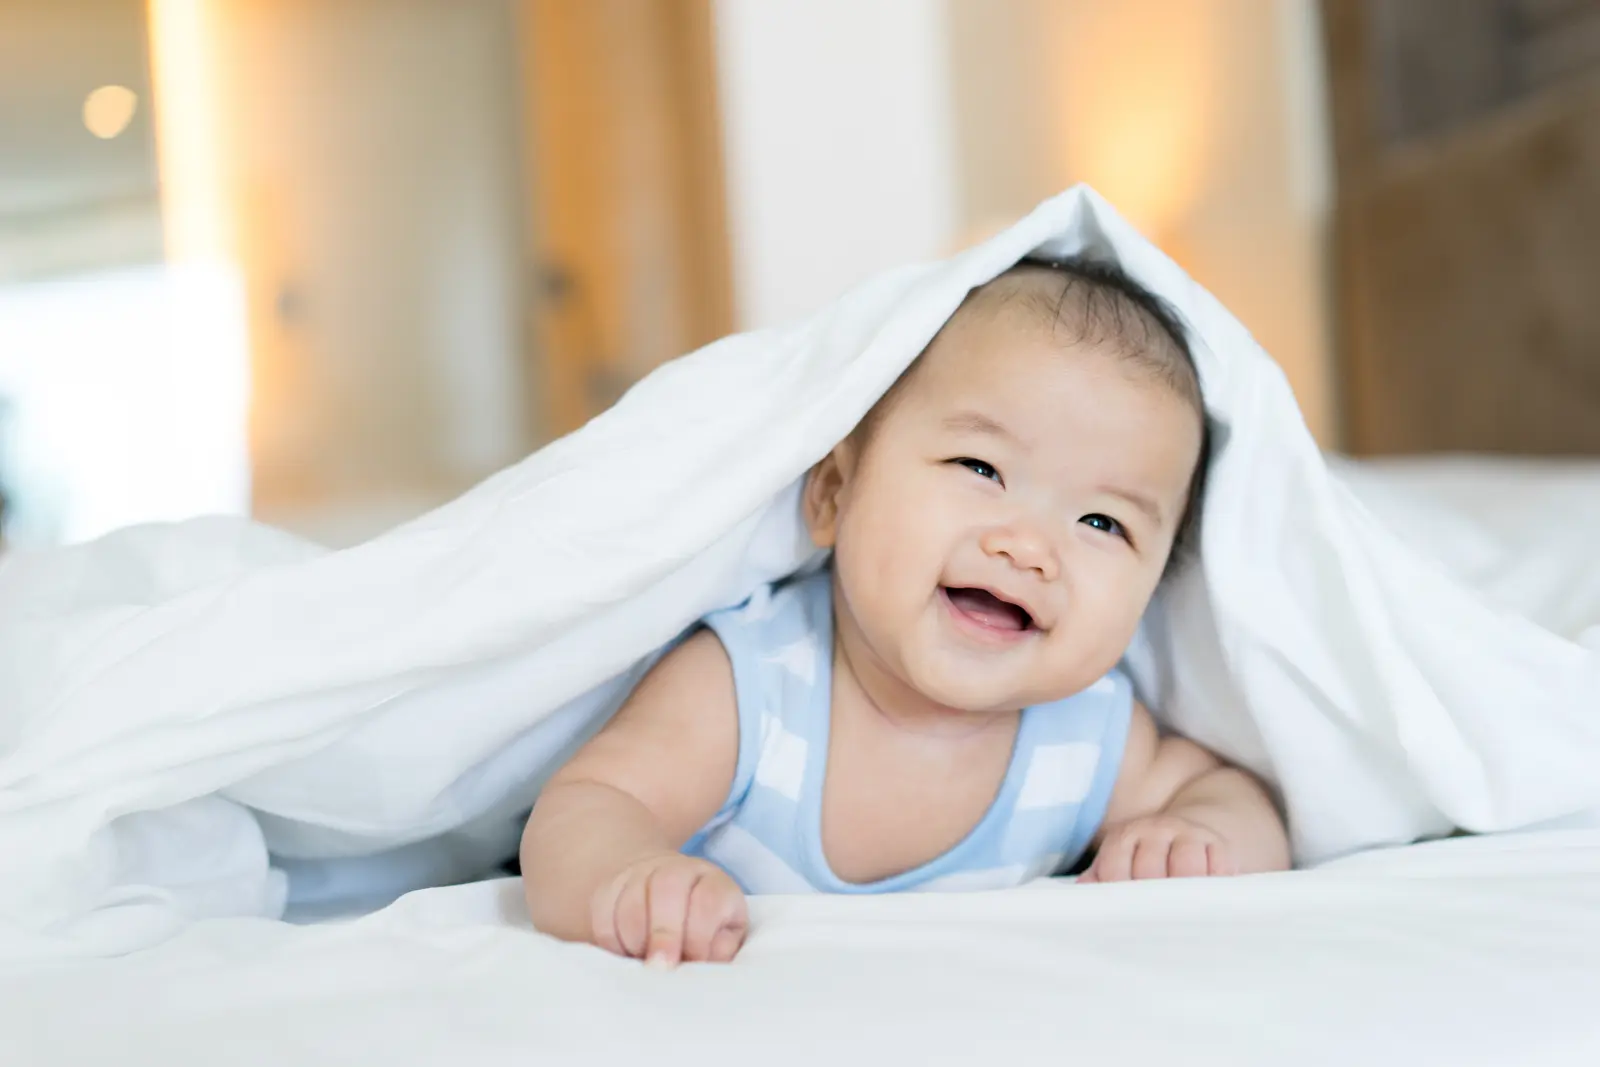 grinning baby under covers Adoption Counseling Support: Professional guidance for emotional well-being during the adoption journey